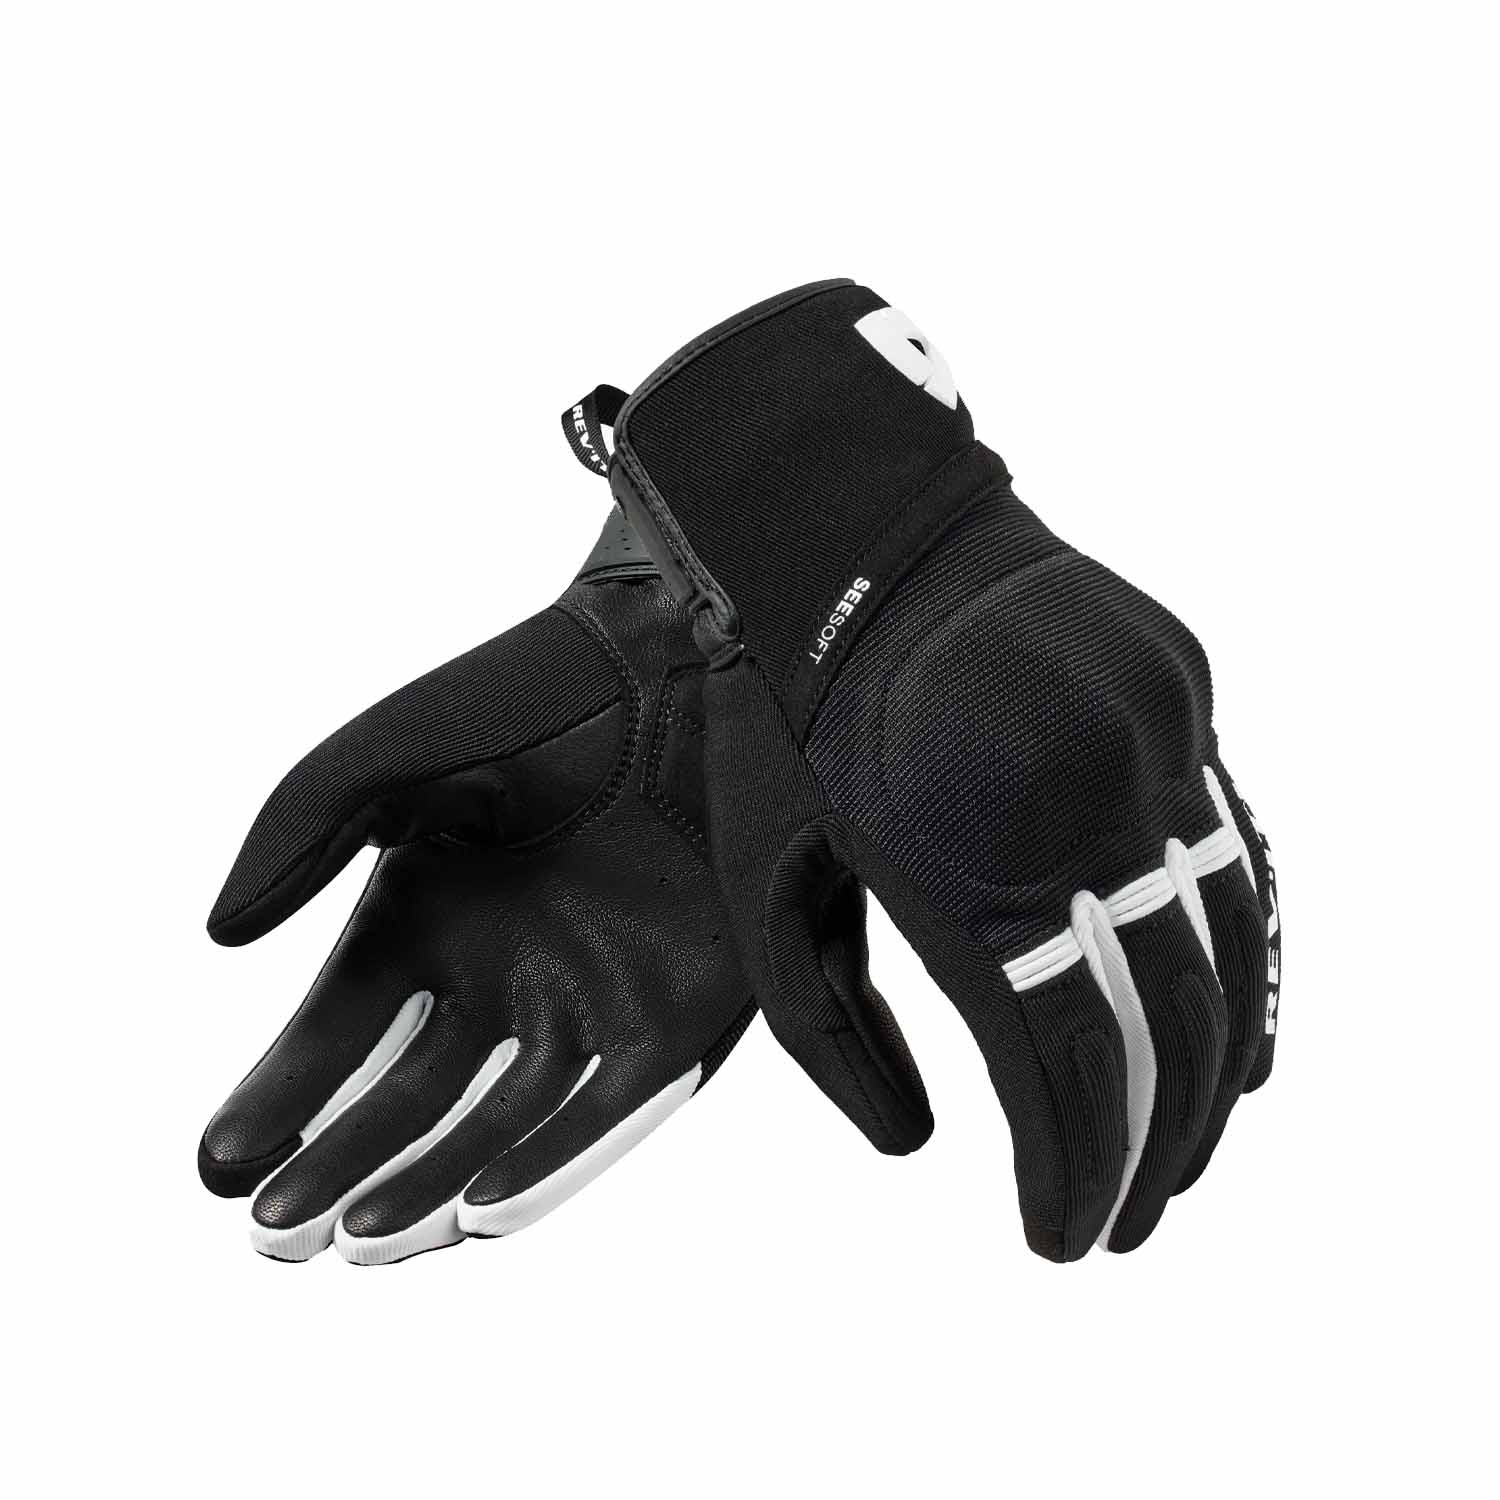 Image of EU REV'IT! Mosca 2 Gloves Black White Taille L